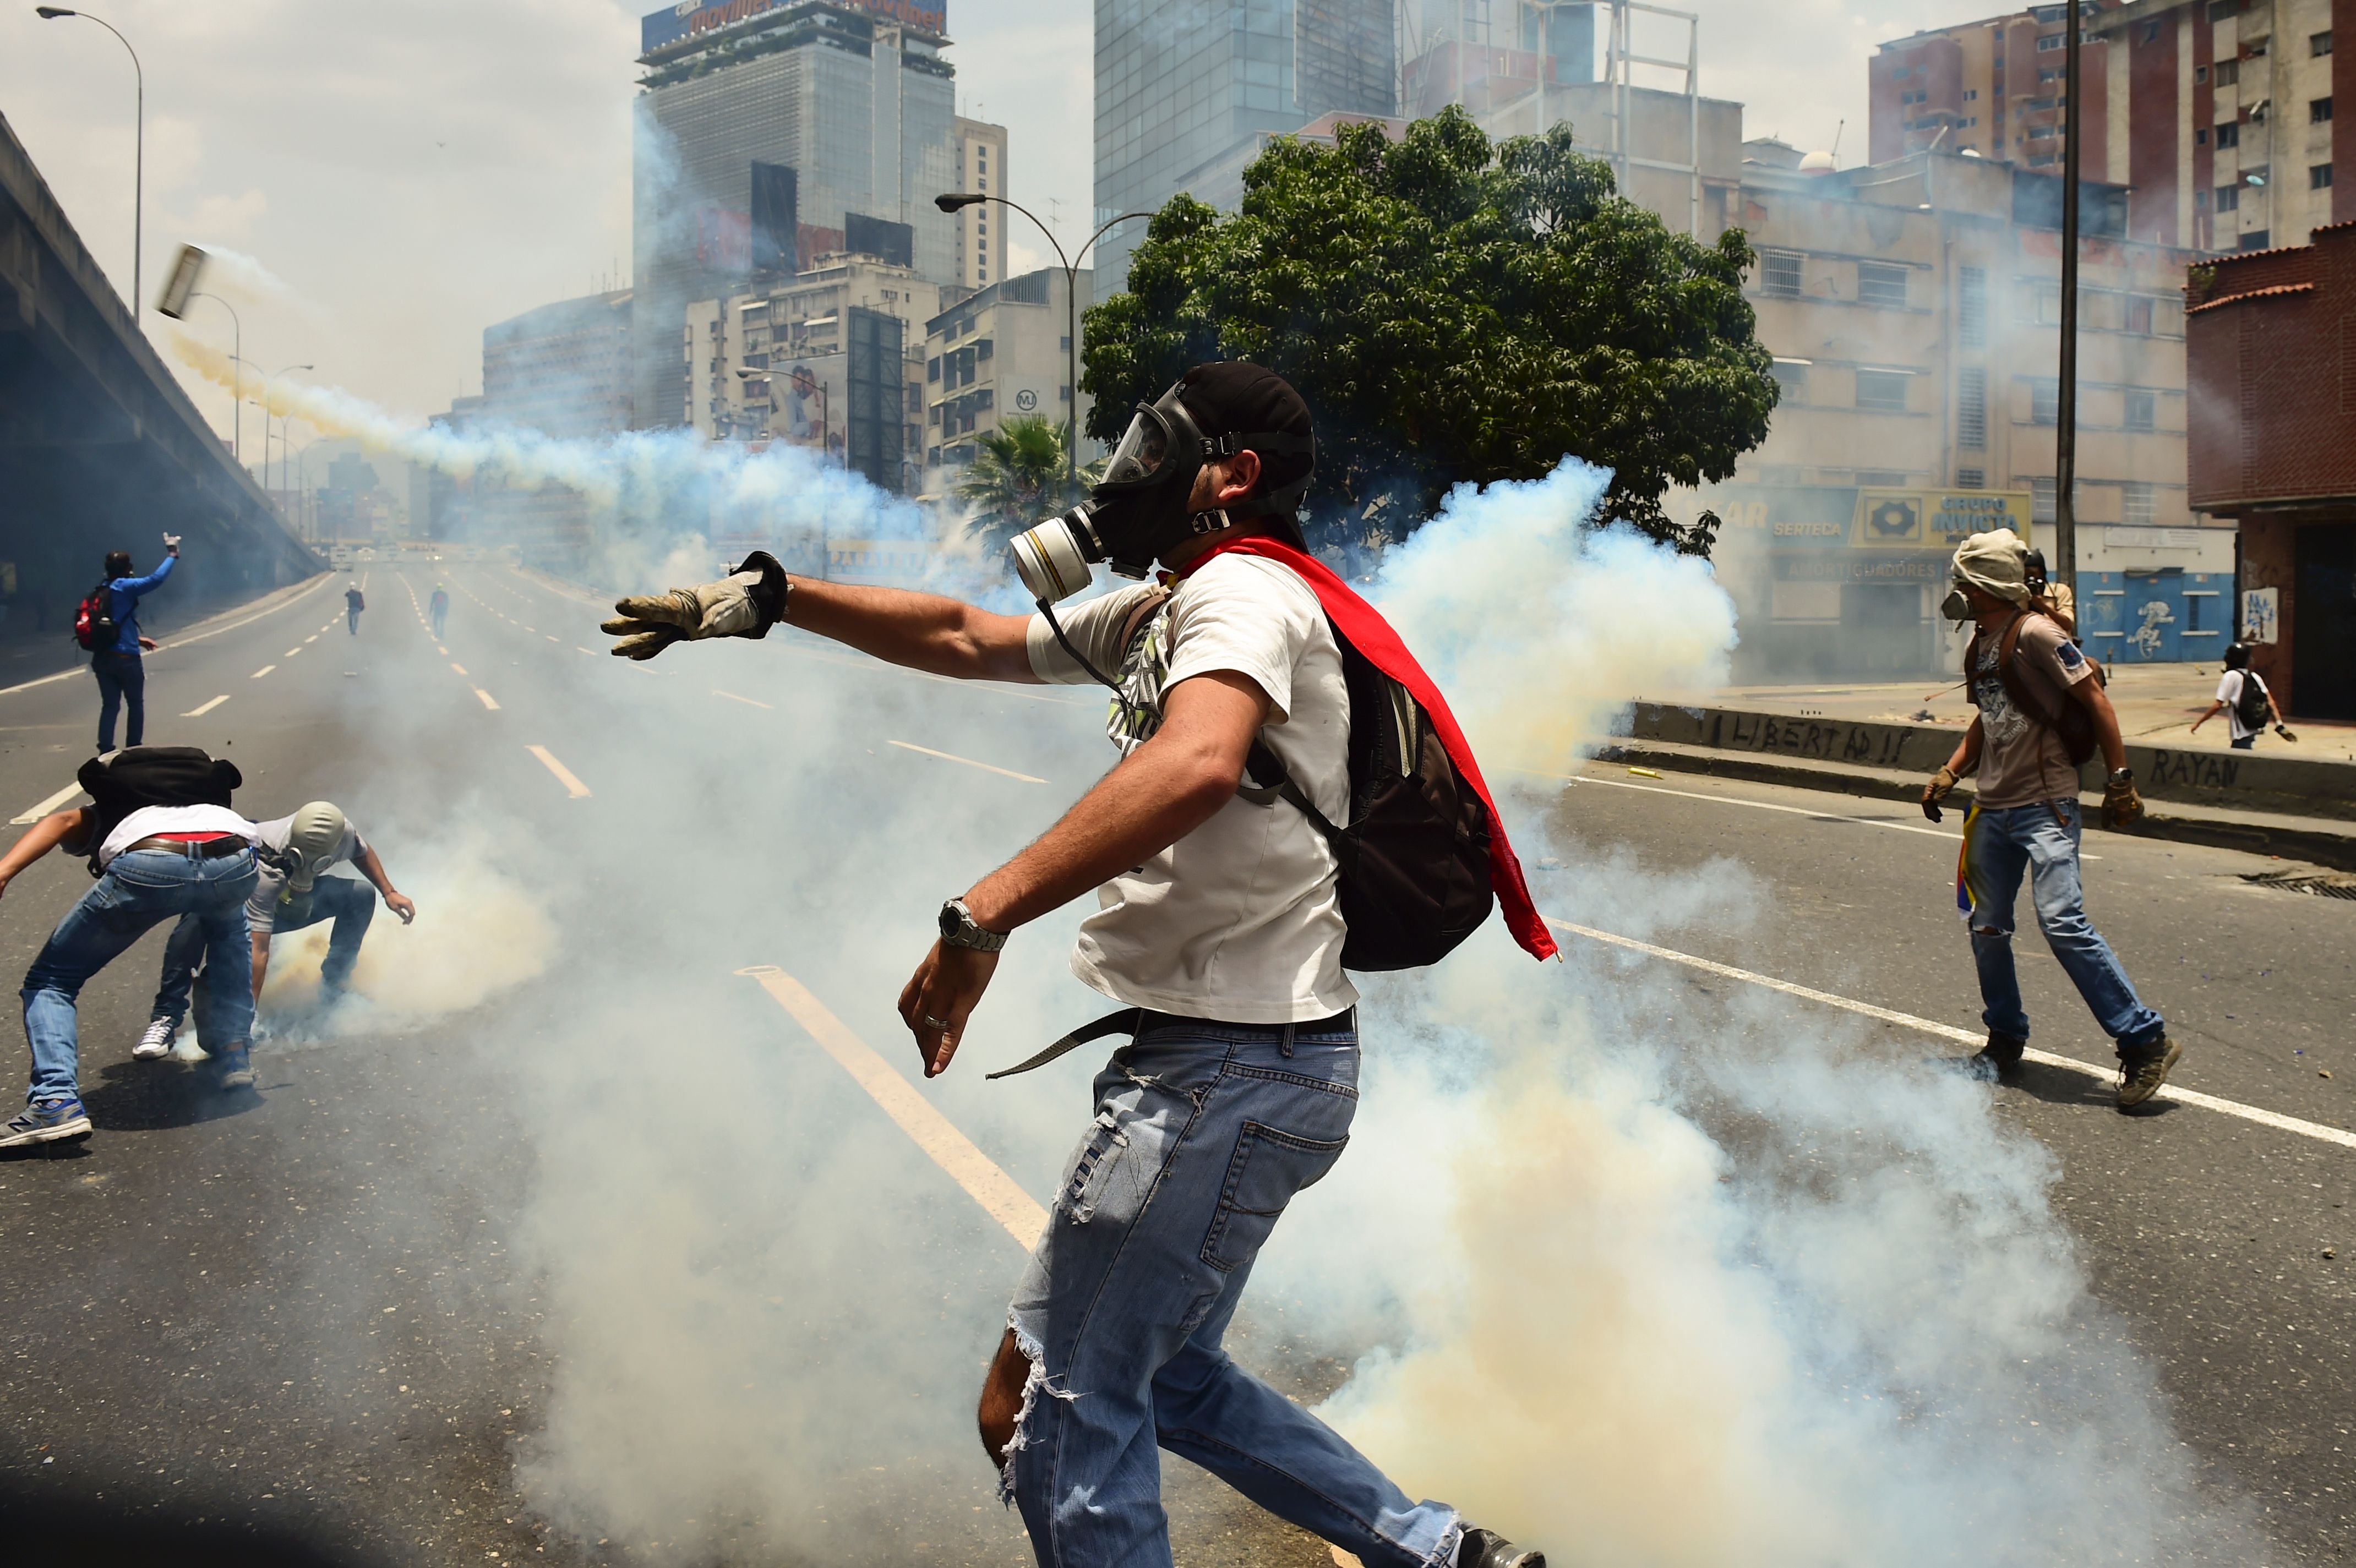 Demonstrators clash with the police during a rally against Venezuelan President Nicolas Maduro, in Caracas on April 19, 2017. (Ronaldo Schemidt—AFP/Getty Images)